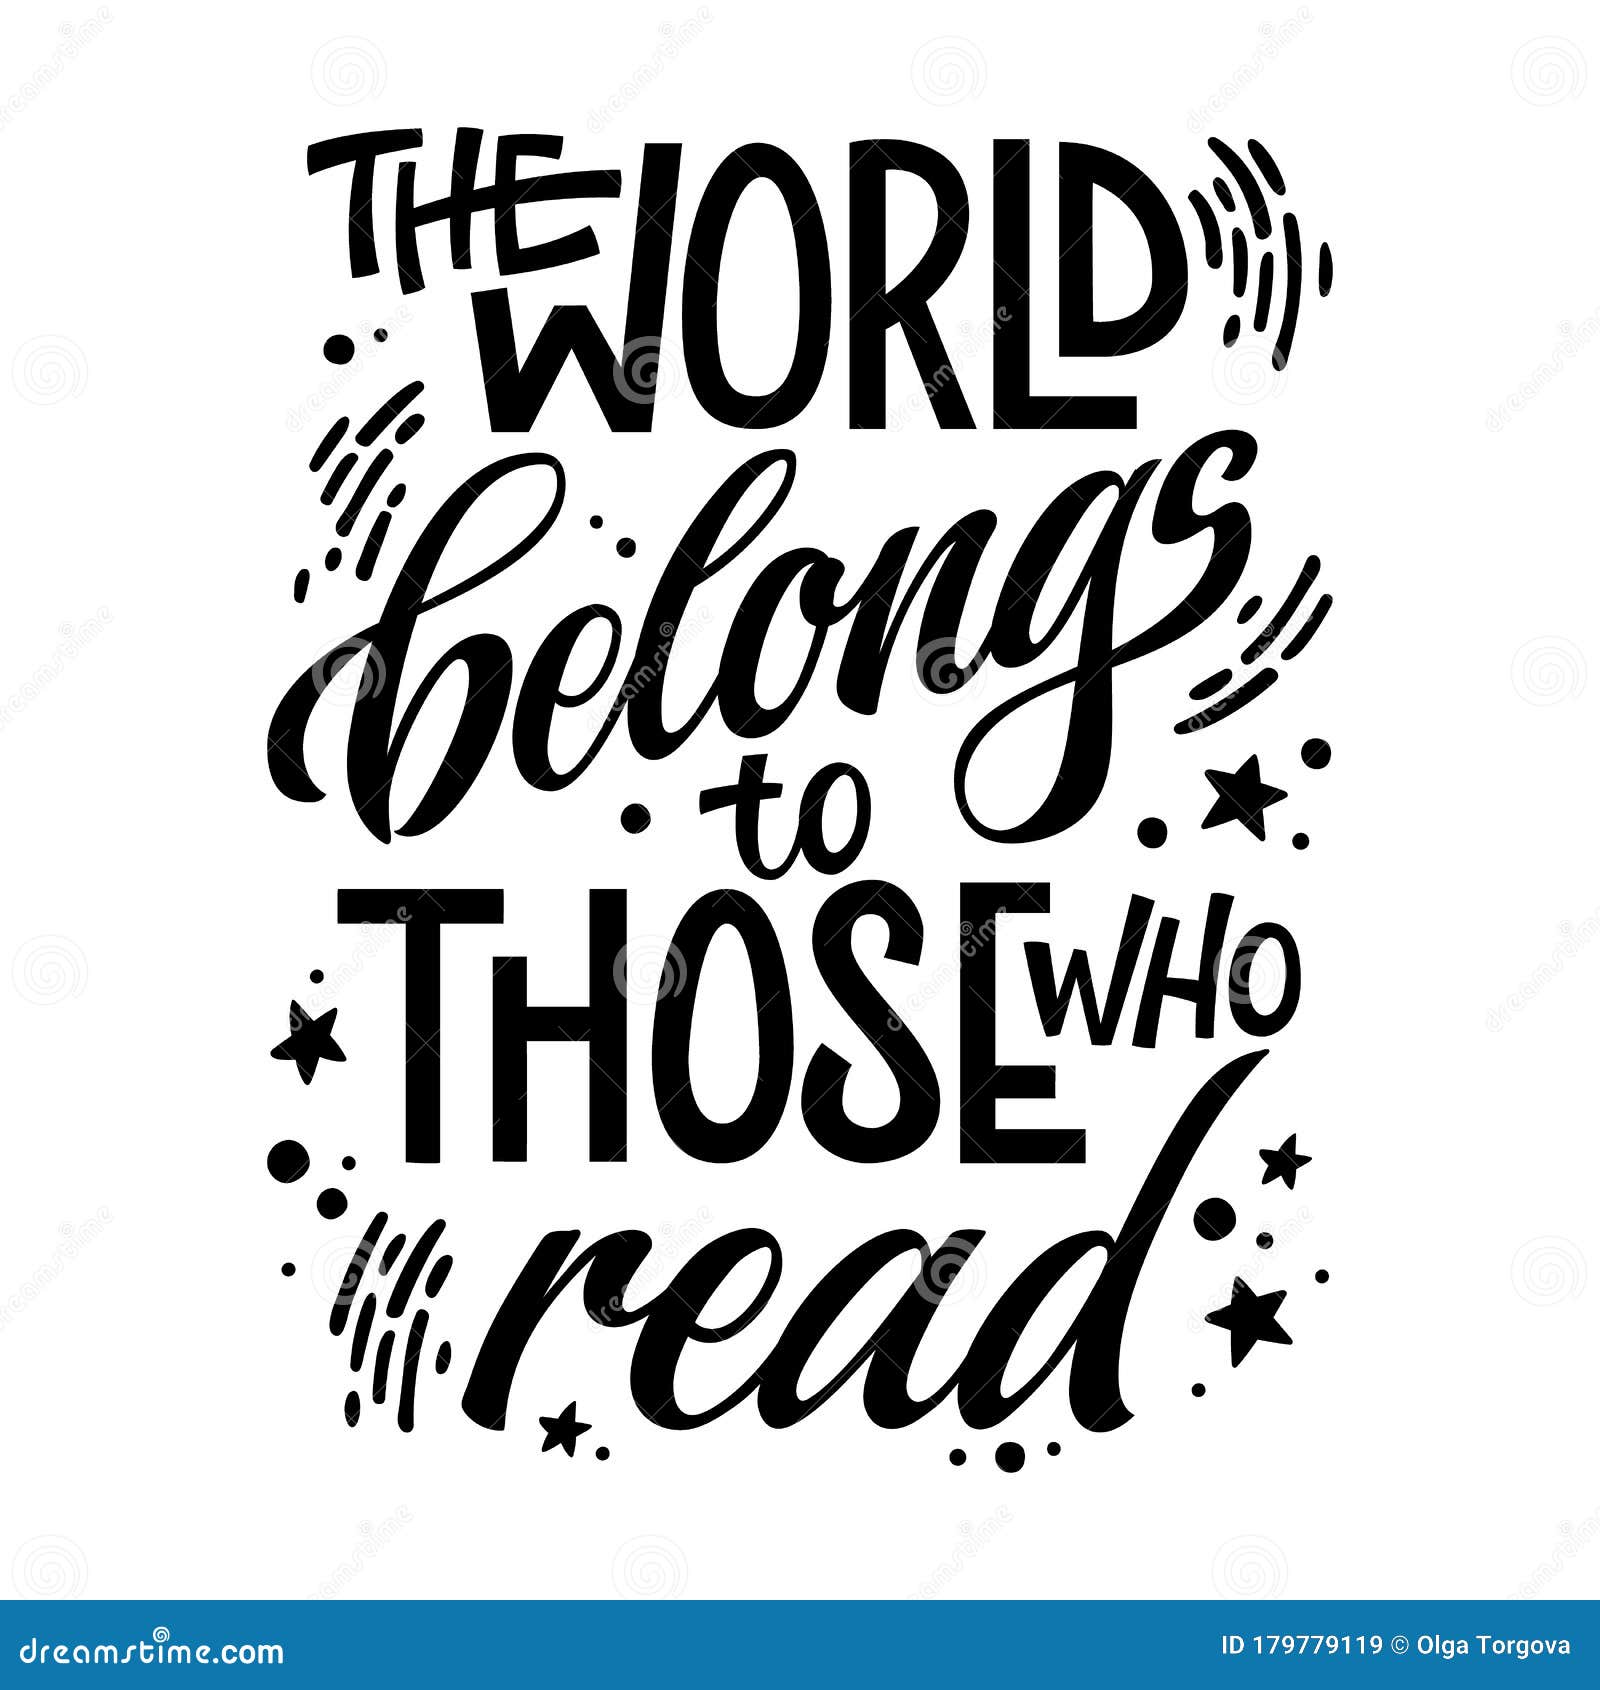 motivation lettering quote about books and reading - the world belongs to those who read.